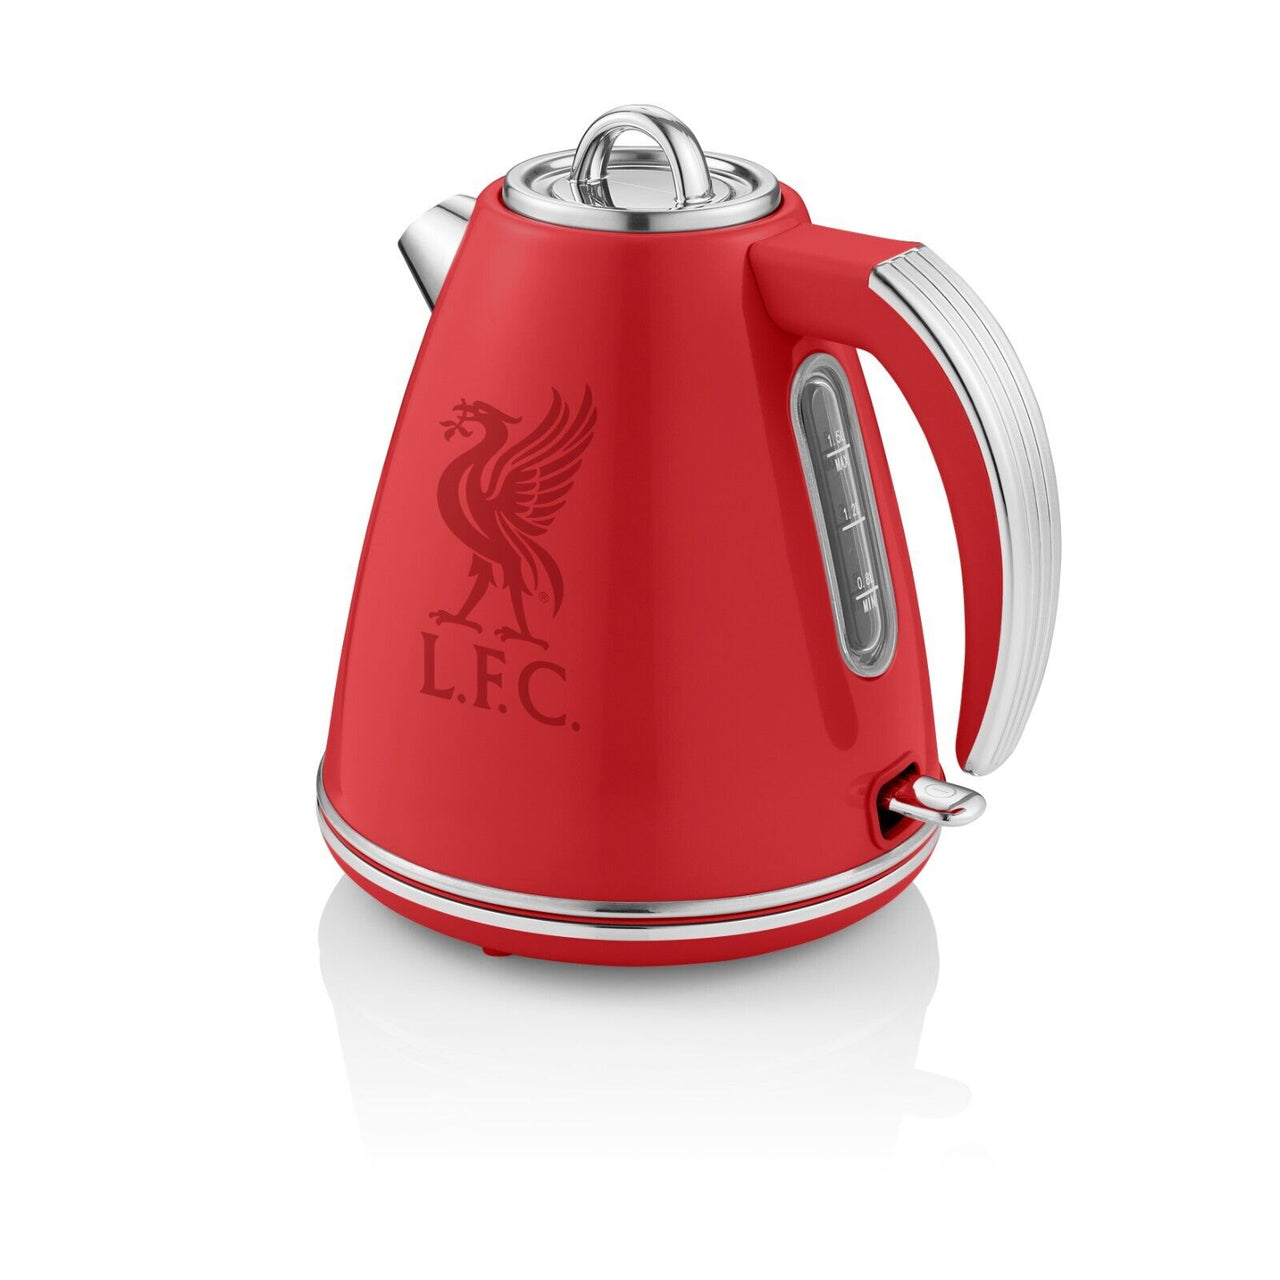 Swan Official Liverpool FC Red 1.5L Jug Kettle & 4 Slice Toaster Matching Set